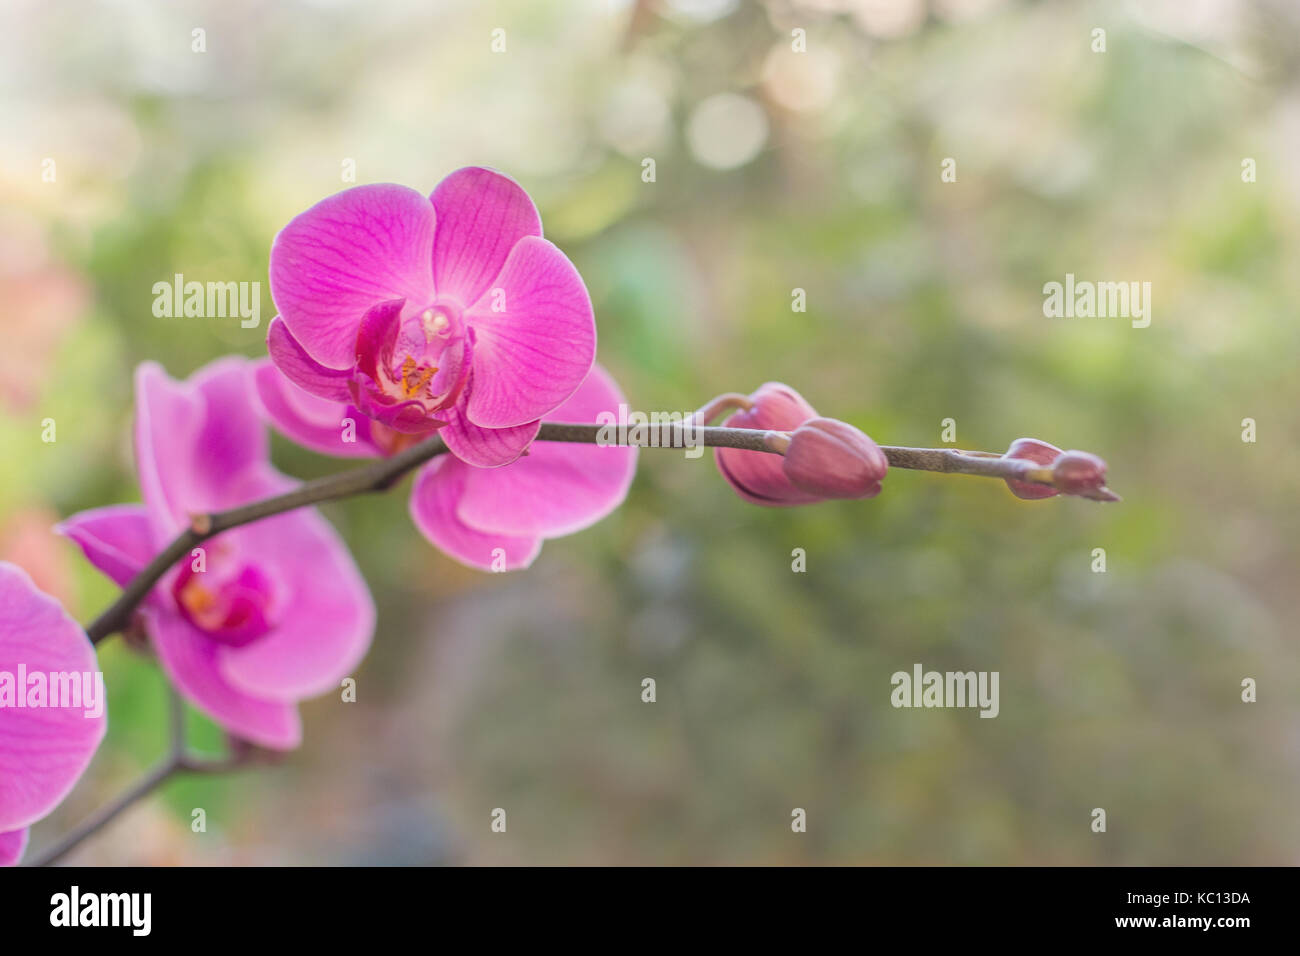 Pink Orchid flower branch growth close up on green DOF background beautiful plant with a bud and Petals image Stock Photo